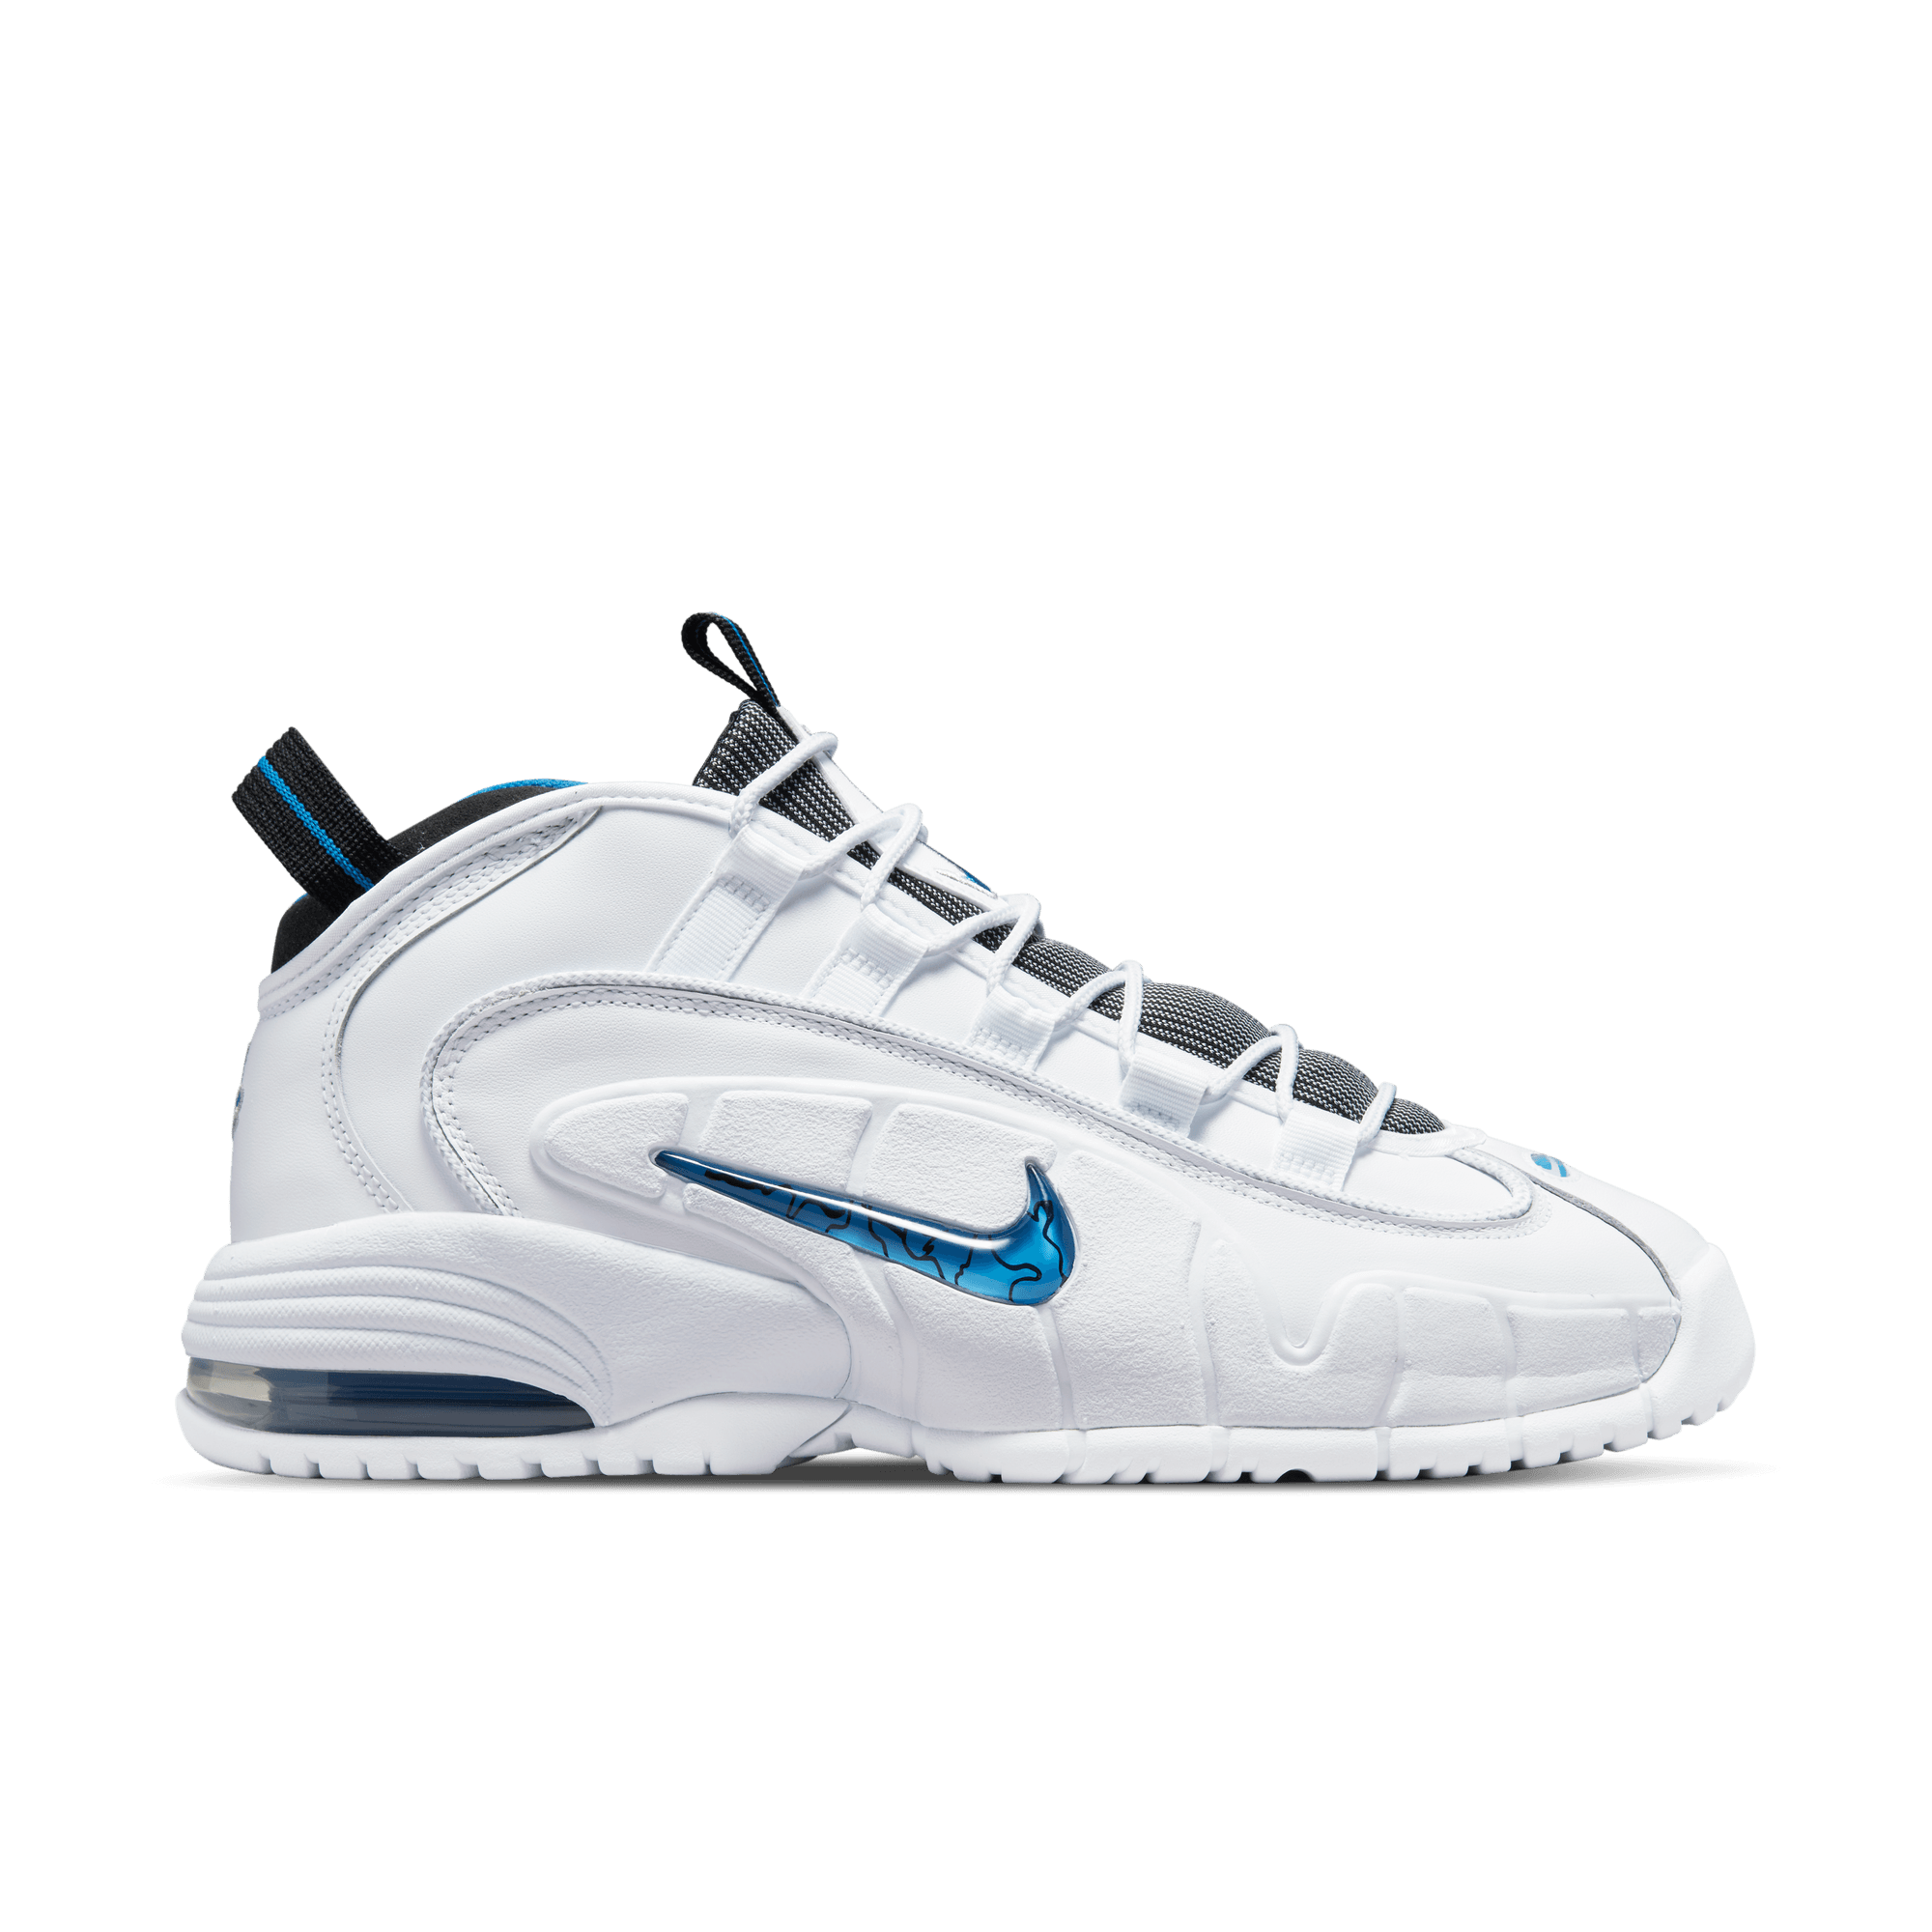 Air Max Penny 1 "Home'